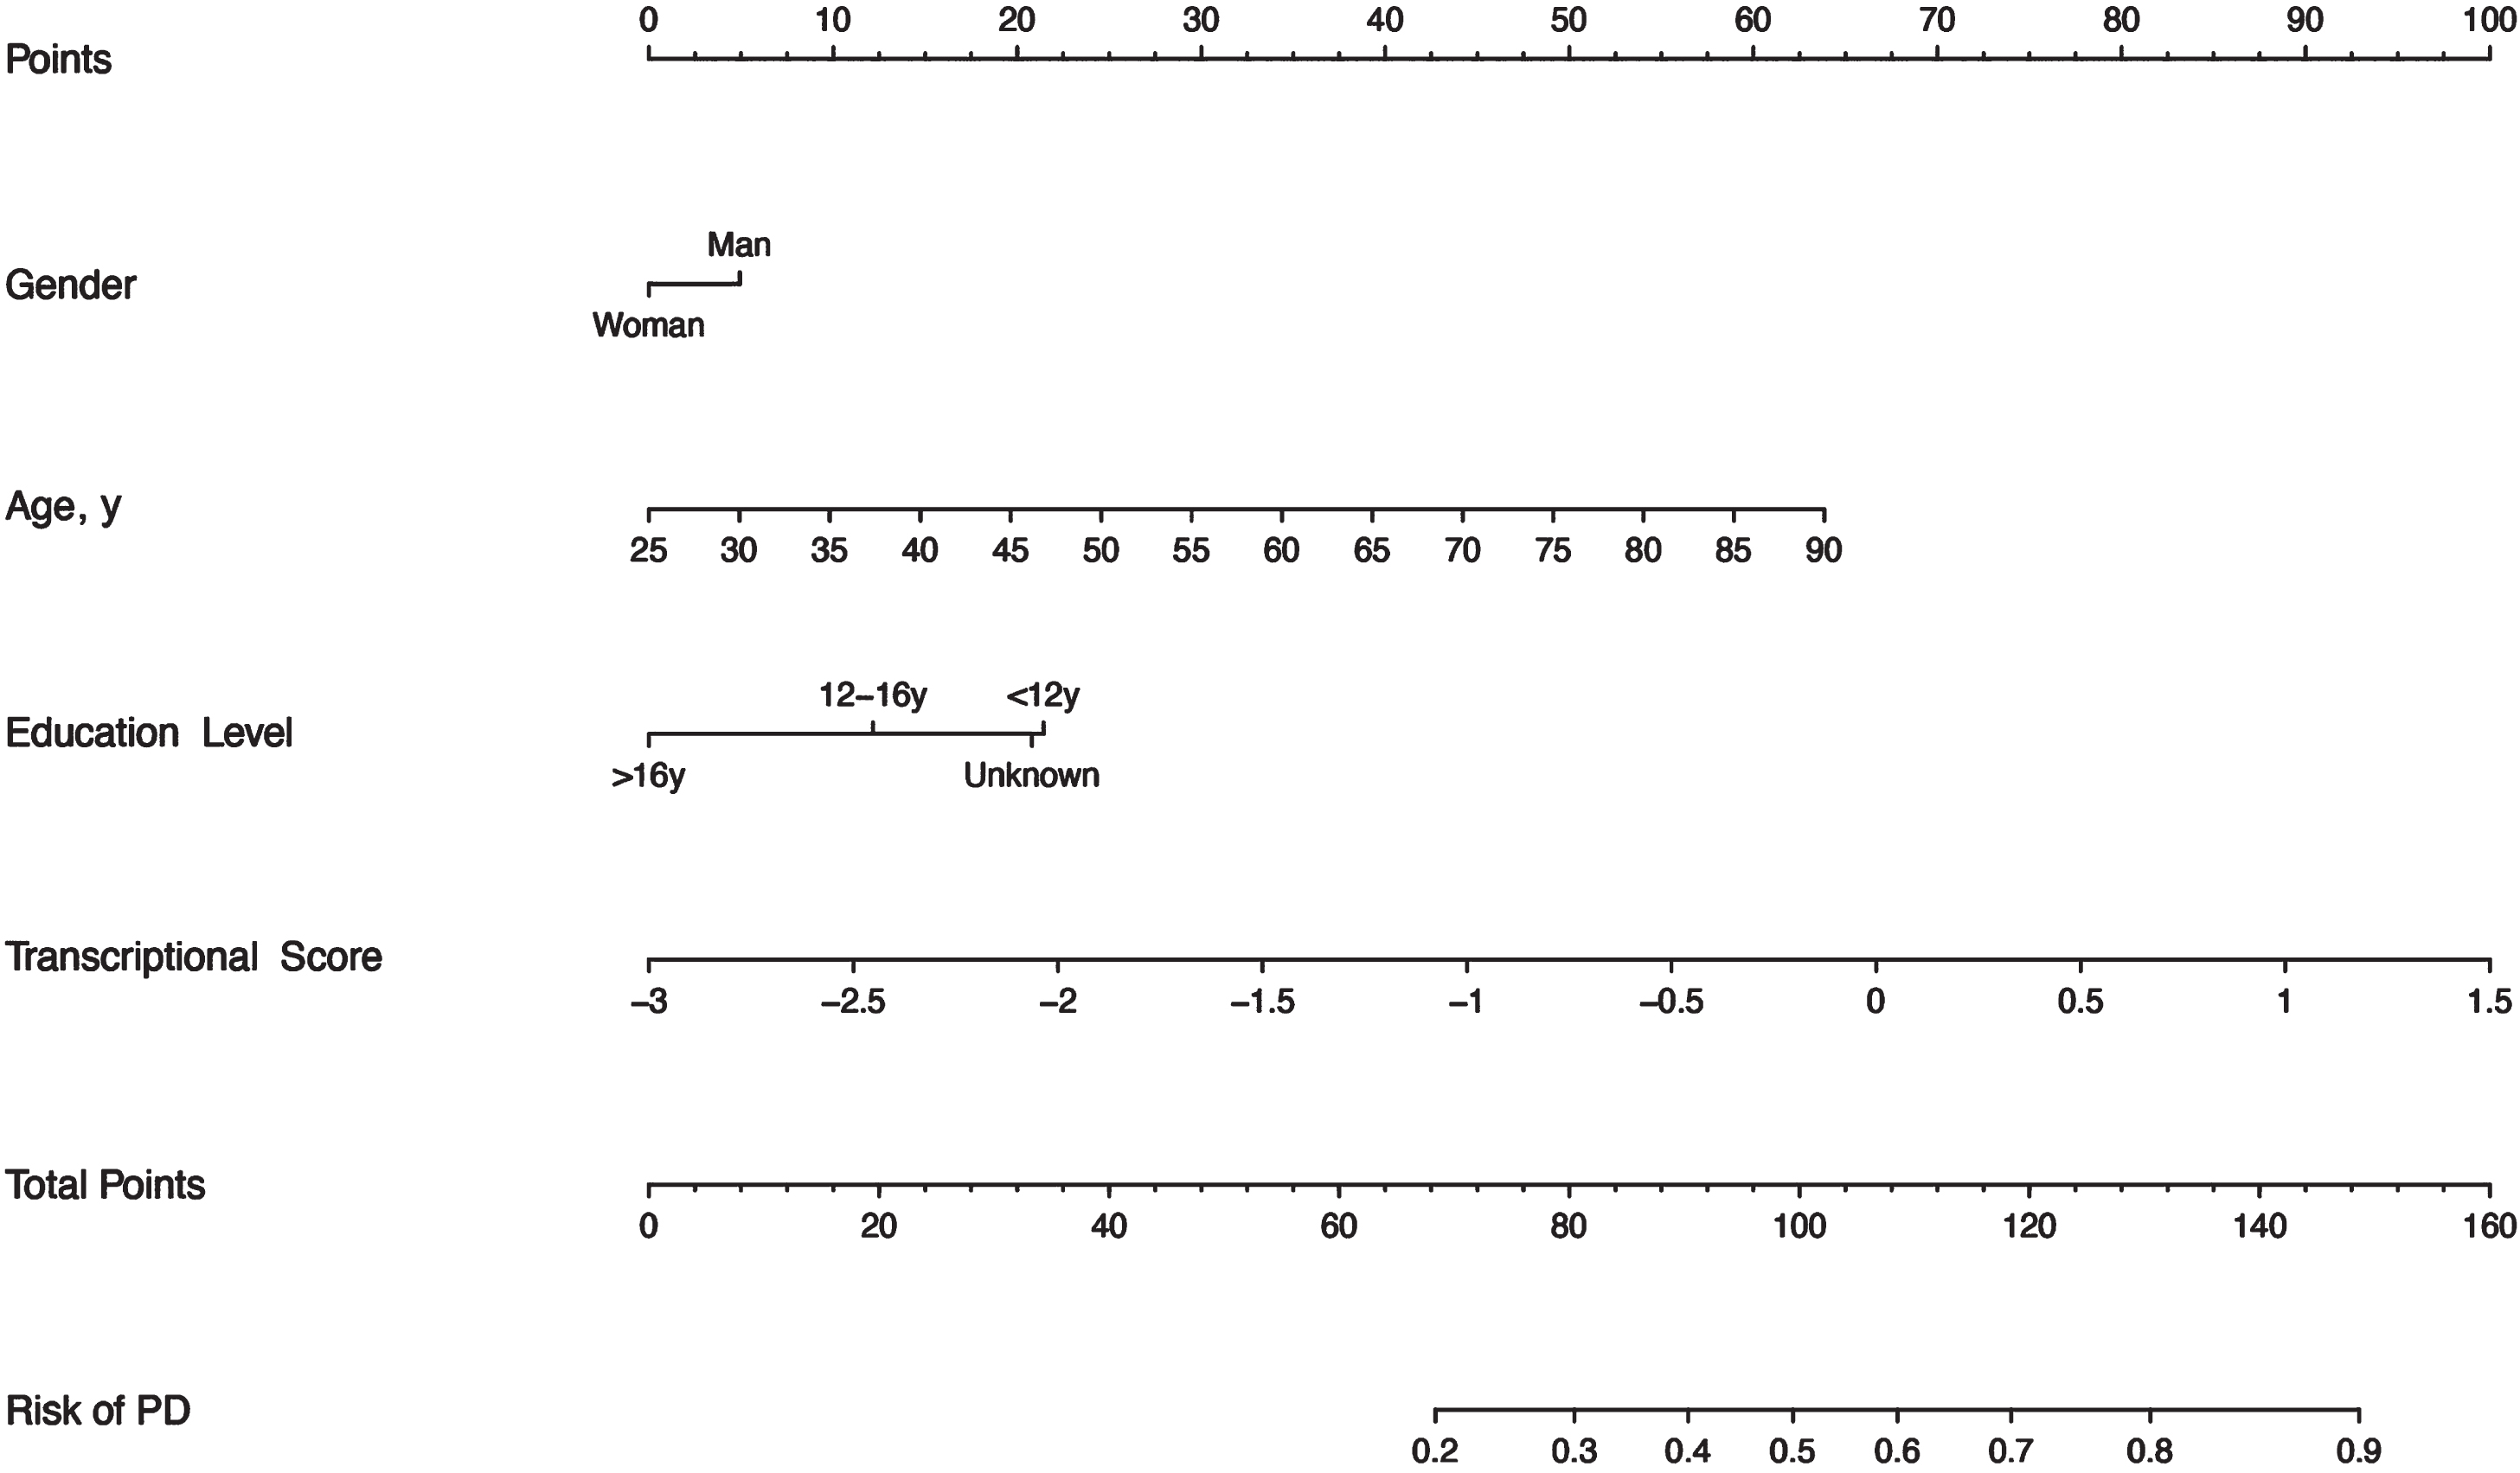 Nomogram to predict the risk of PD. Shown are clinical predictors and transcriptional scores as well as their corresponding nomogram points. The total points indicate the addition of the scores for each variable, then a vertical line can be drawn to determine the risk of PD according to the total points.